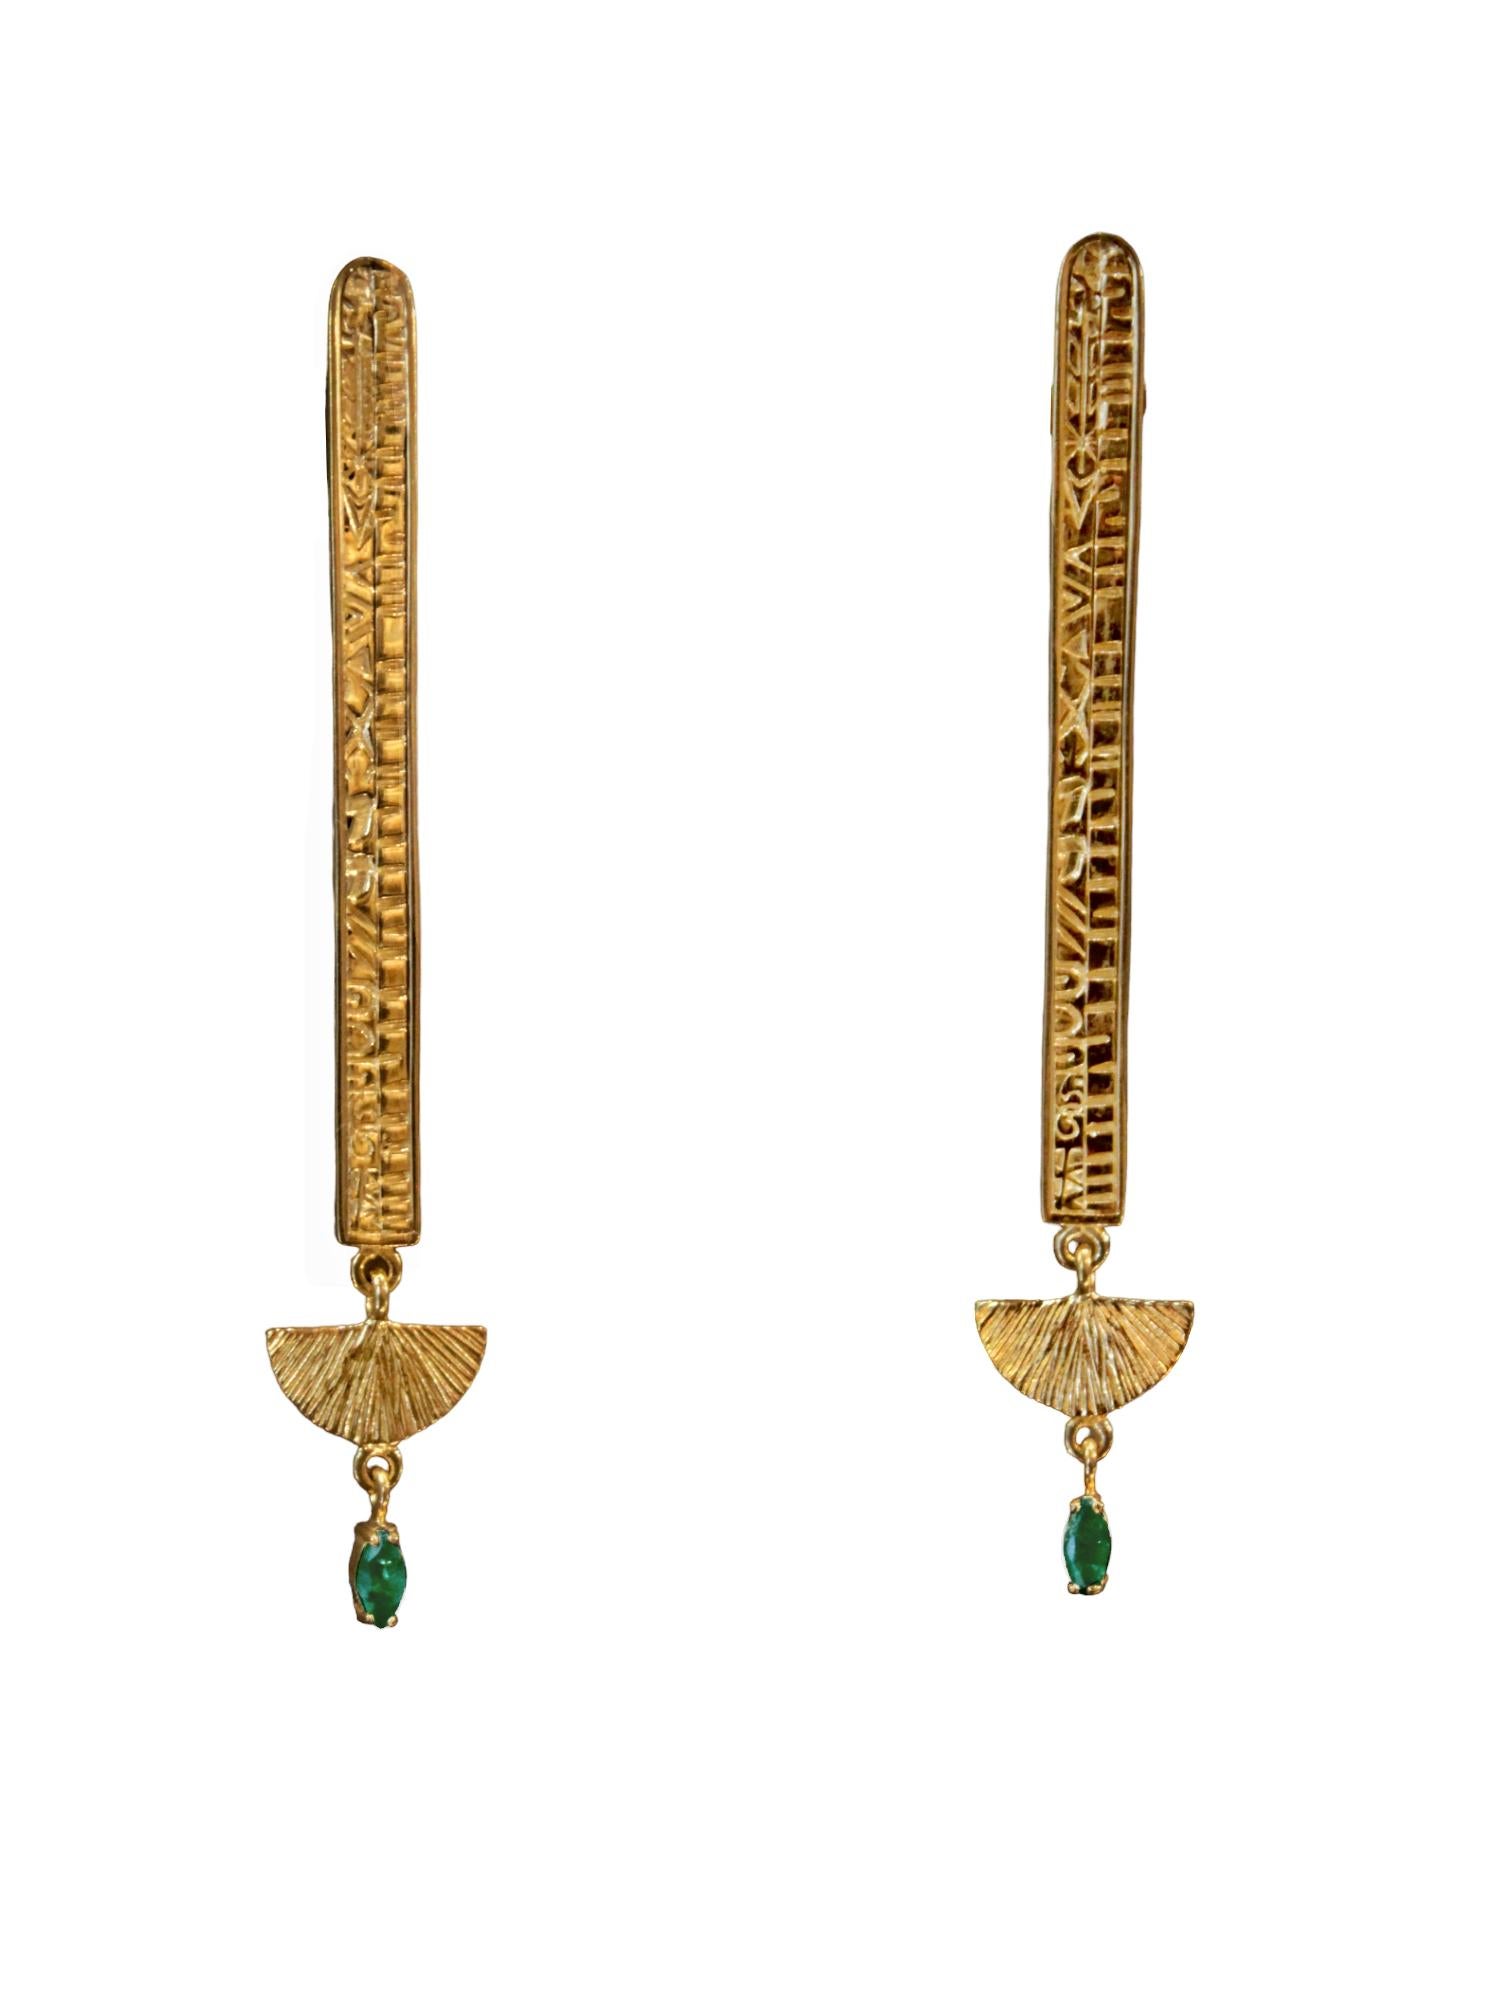 Women's Cleo Earrings in 14k Yellow Gold: an Ode to Ancient Egypt For Sale